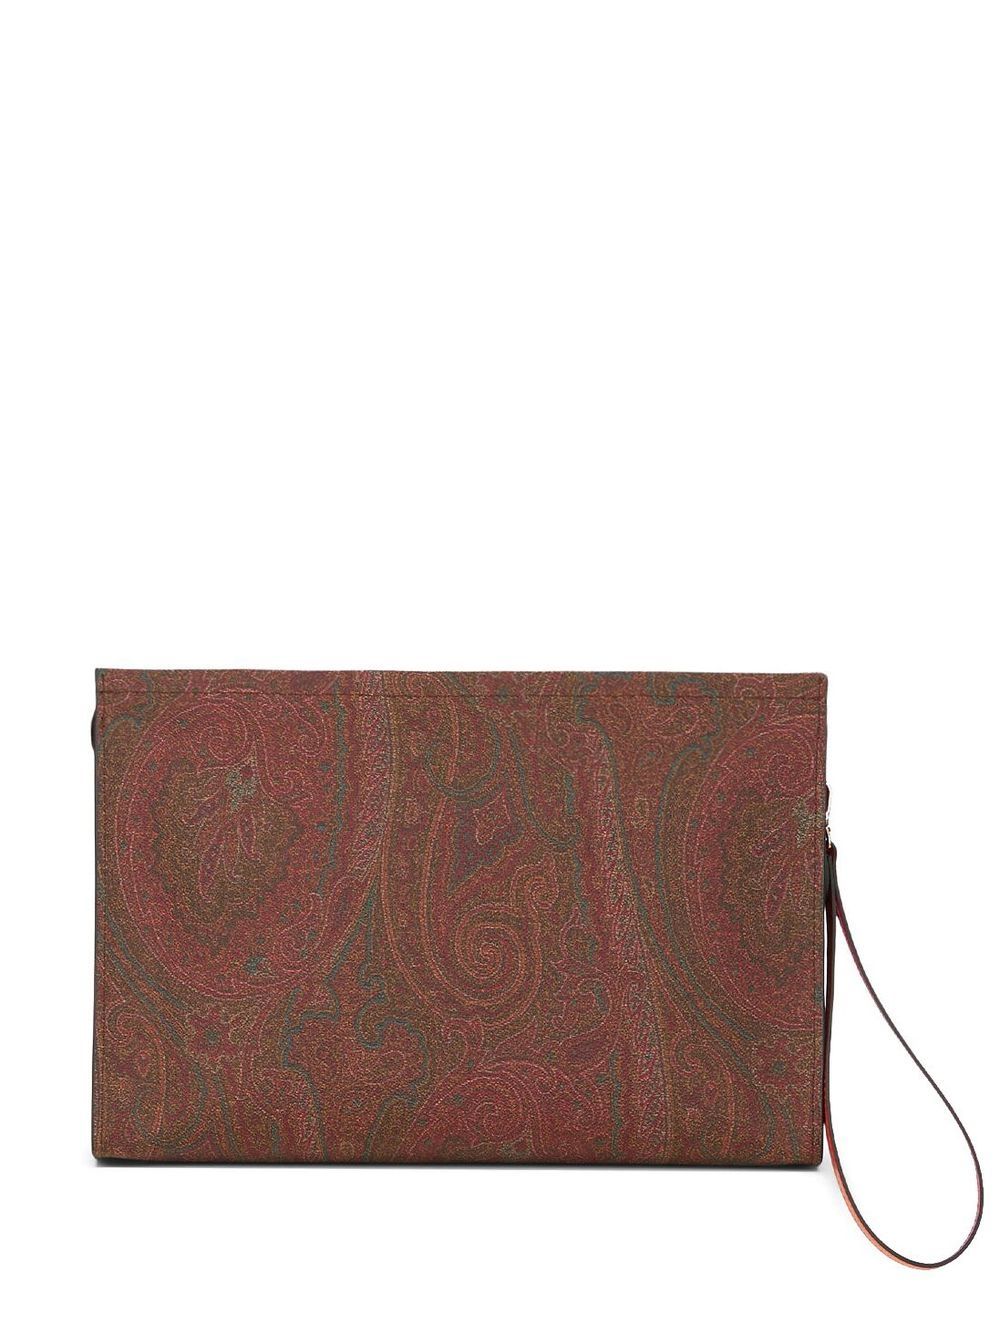 ETRO Milano Paisley Collection Leather Trimmed Clutch 